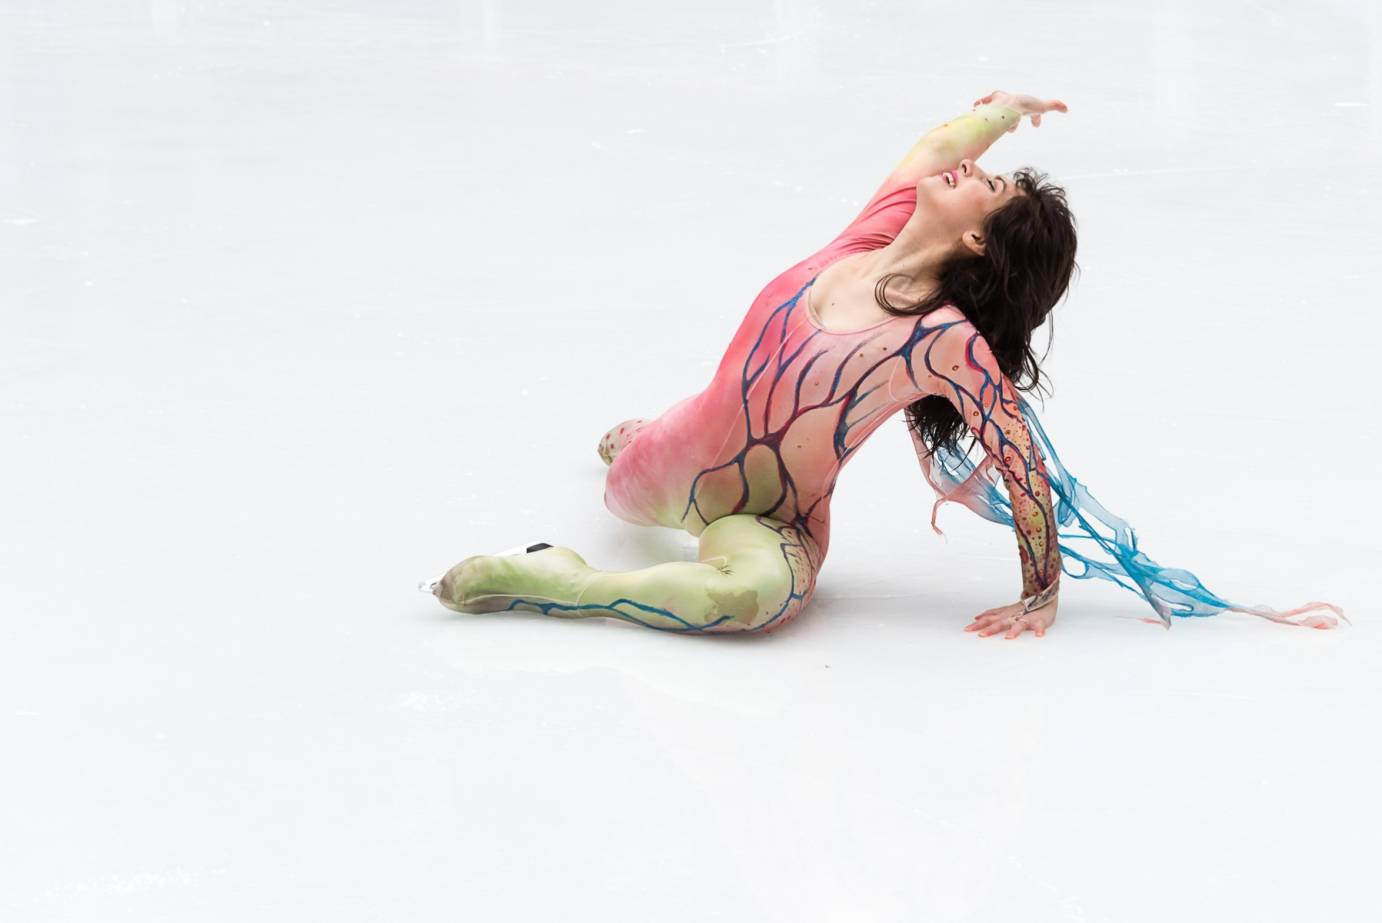 An ice dancer in a pastel colored unitard, lays on the ice and passionately raises her arm to the sky